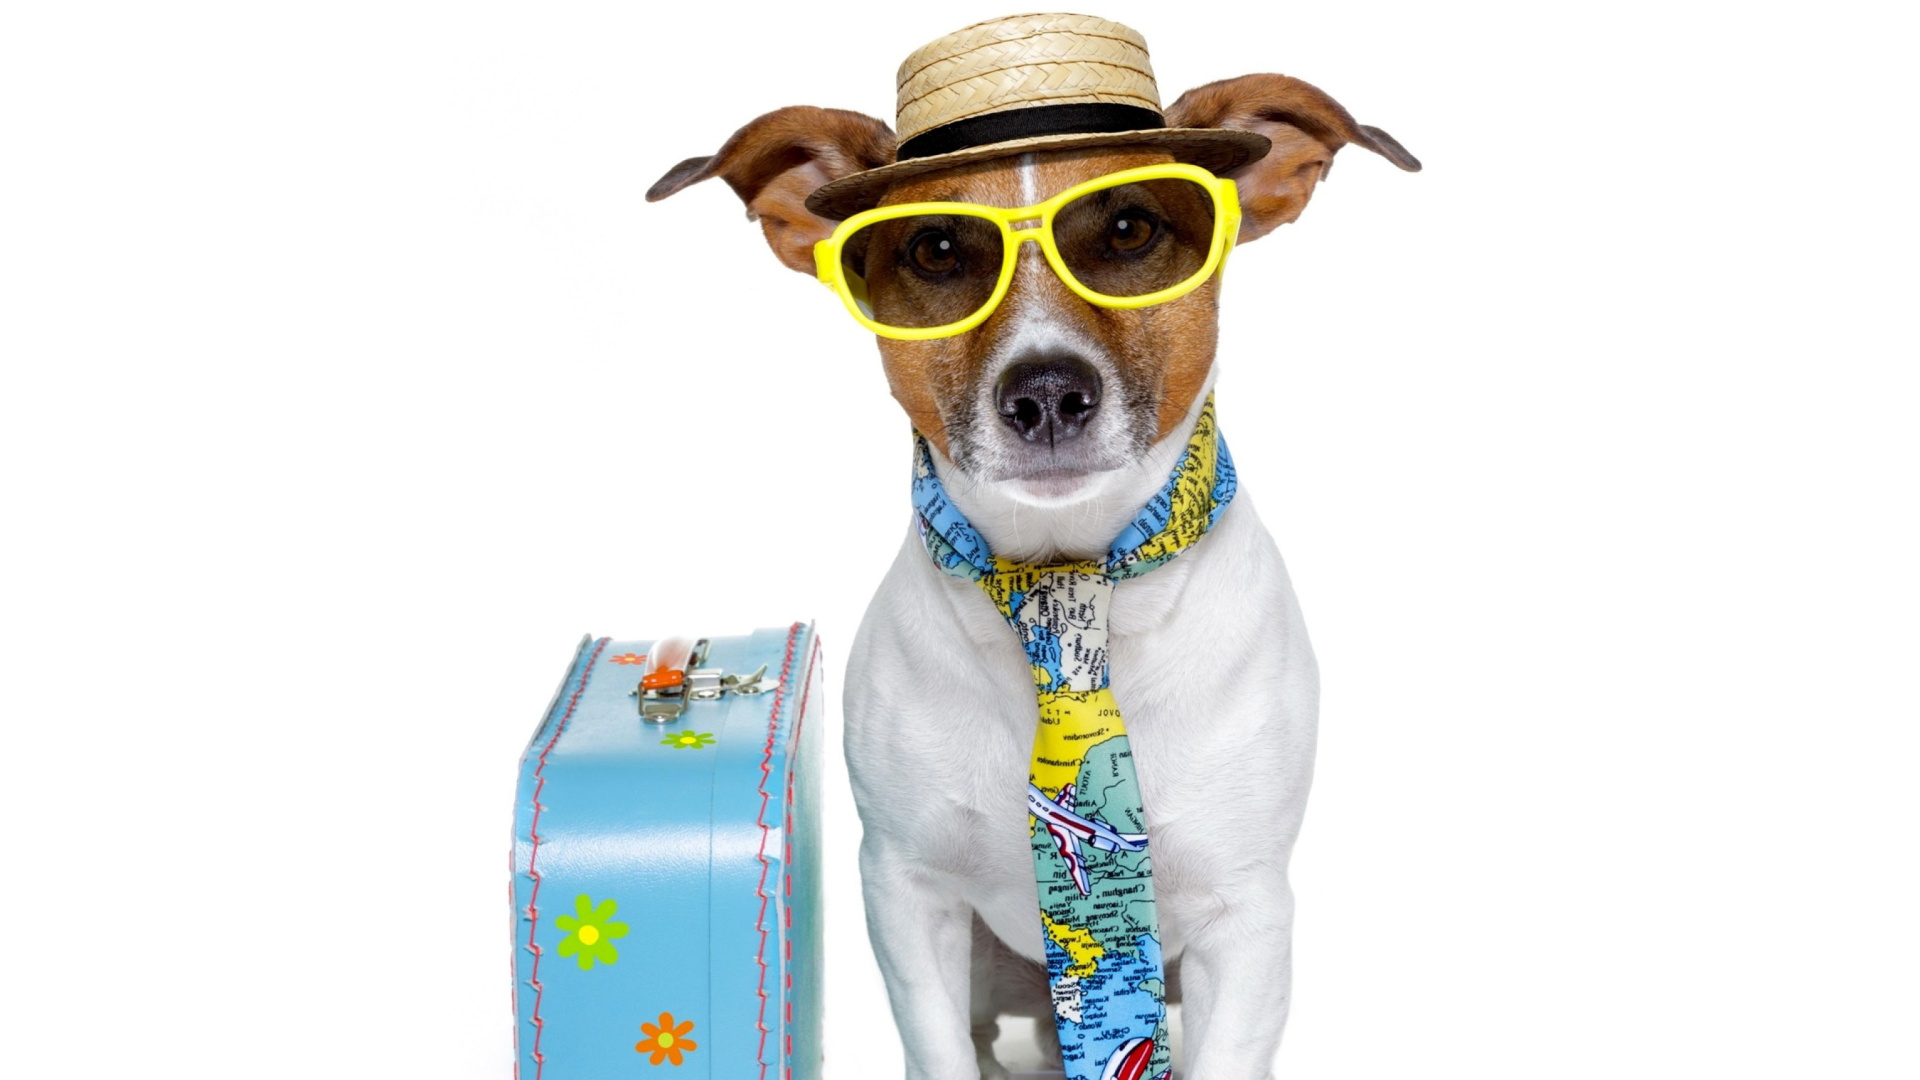 Funny dog going on holiday wallpaper 1920x1080